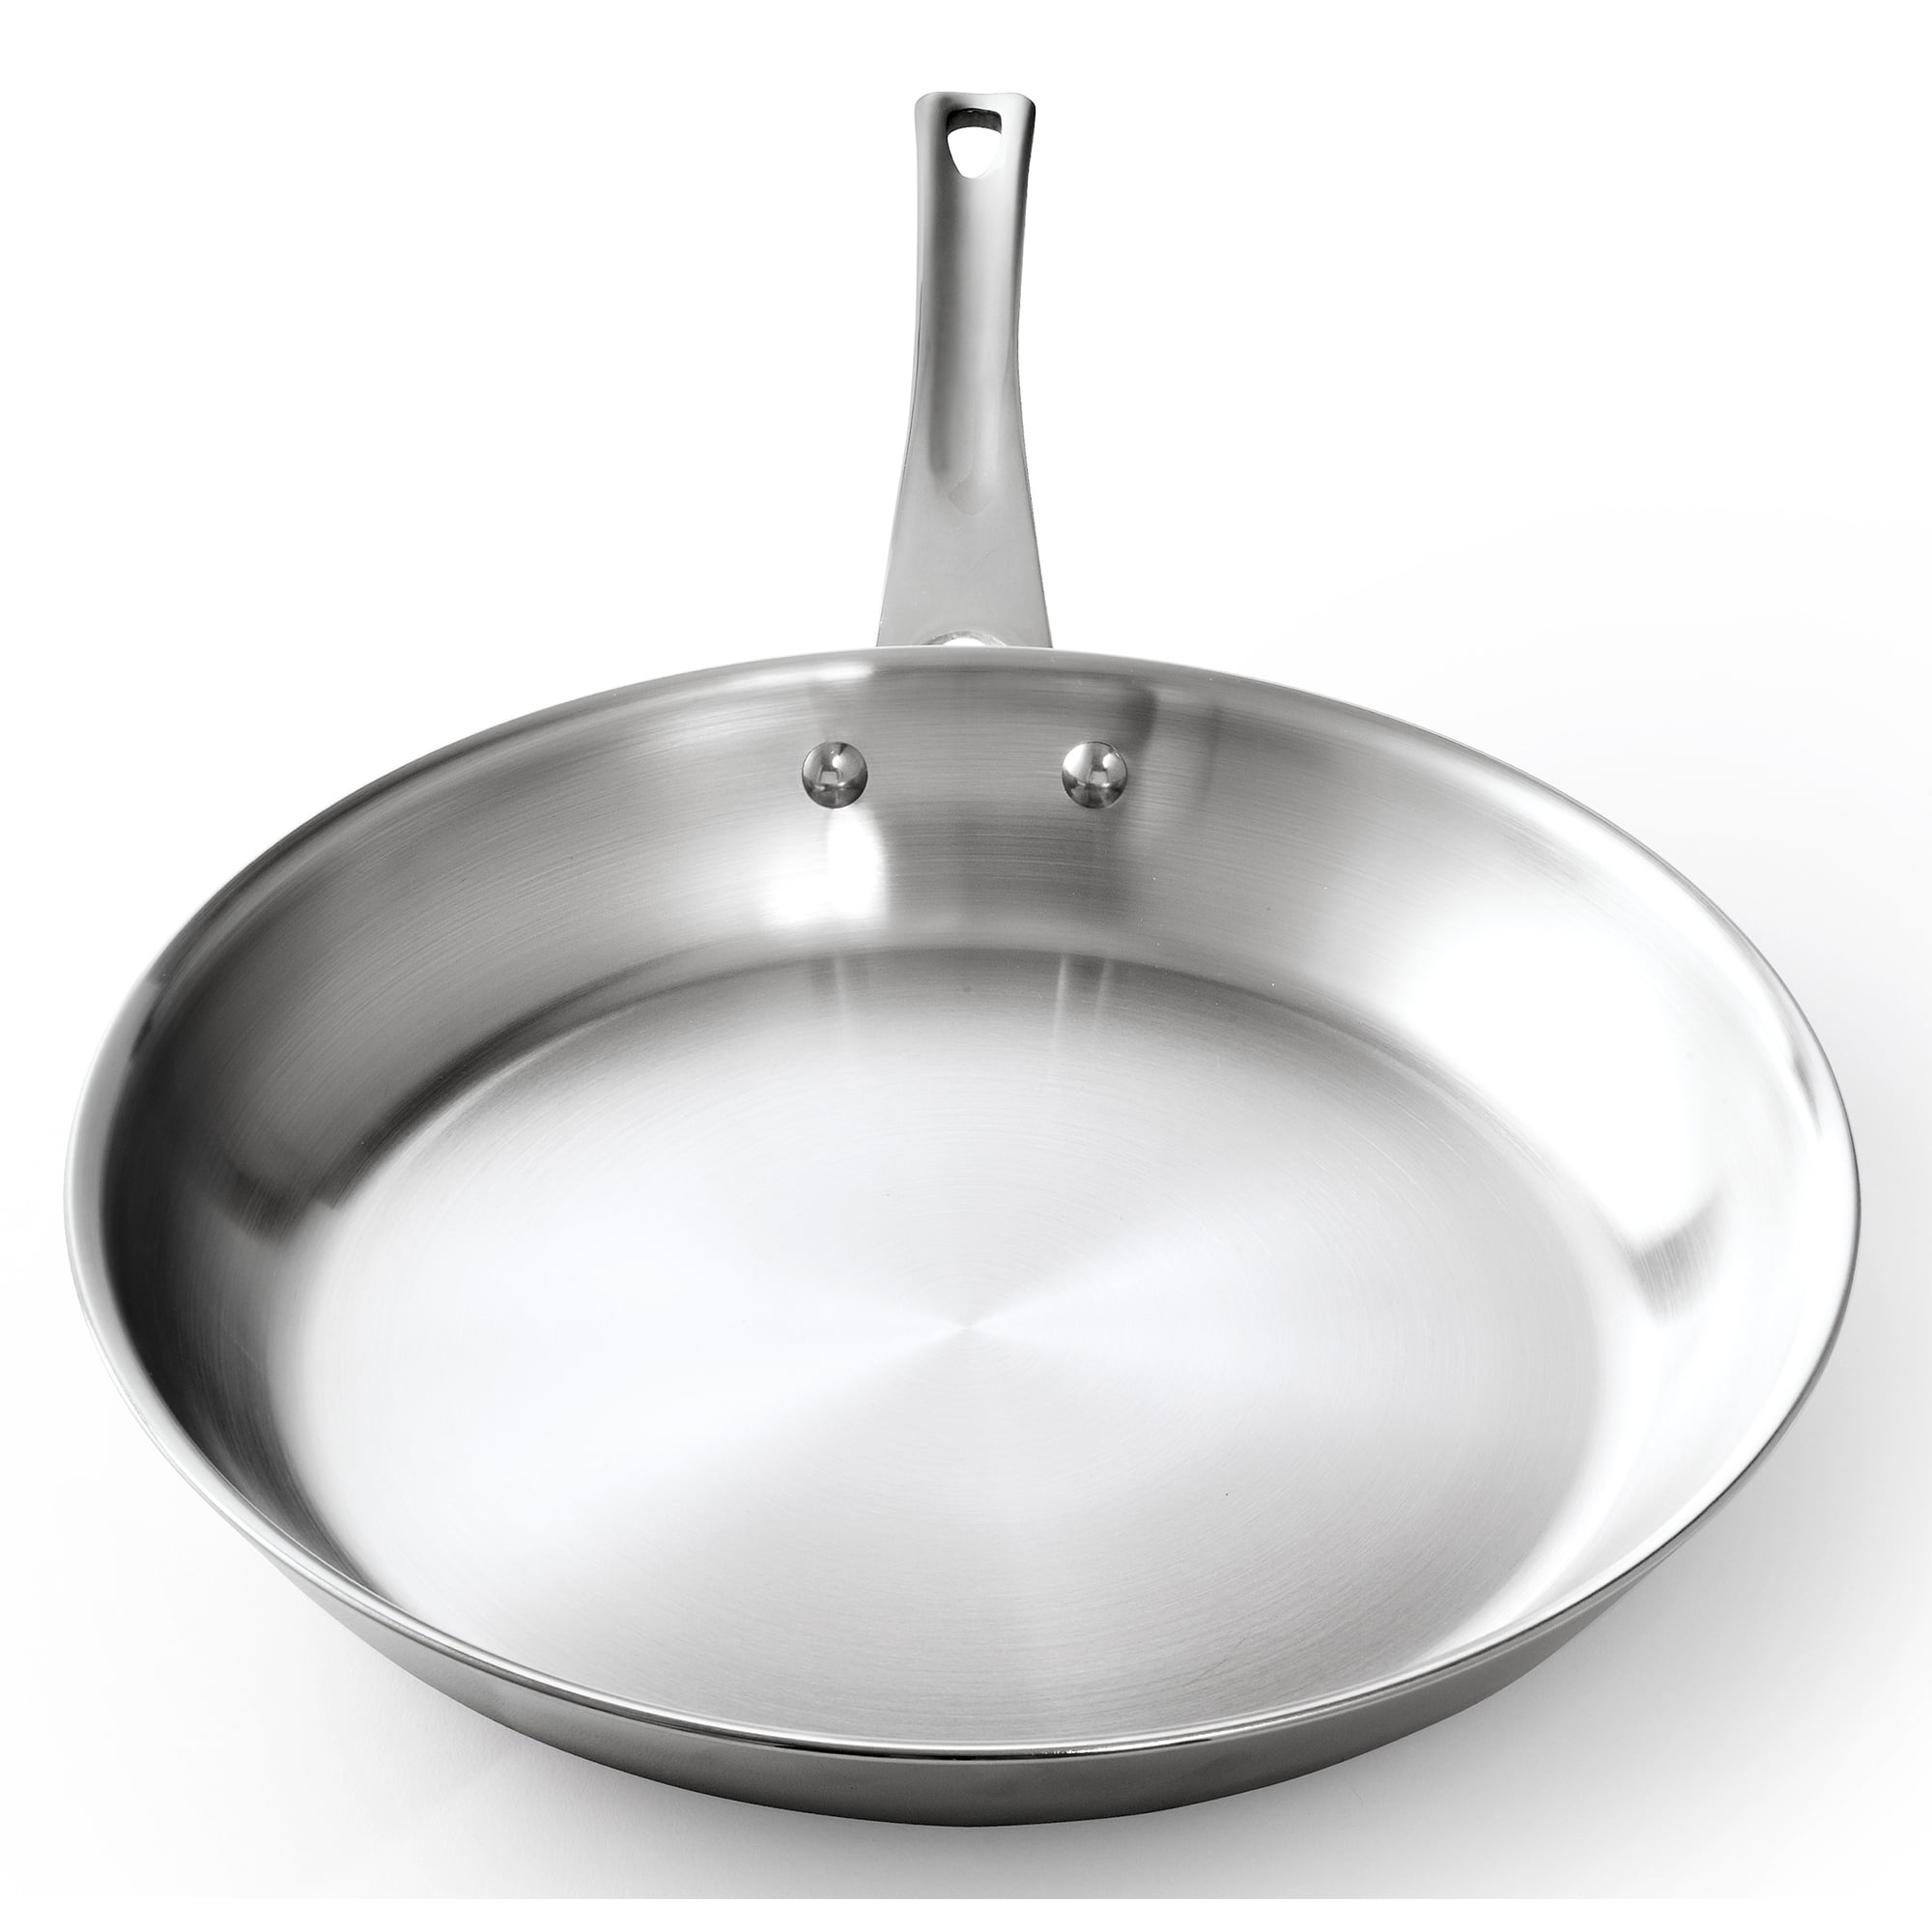 10 Stainless Steel Earth Pan by Ozeri, 100% PTFE-Free Restaurant Edition, 1  - City Market